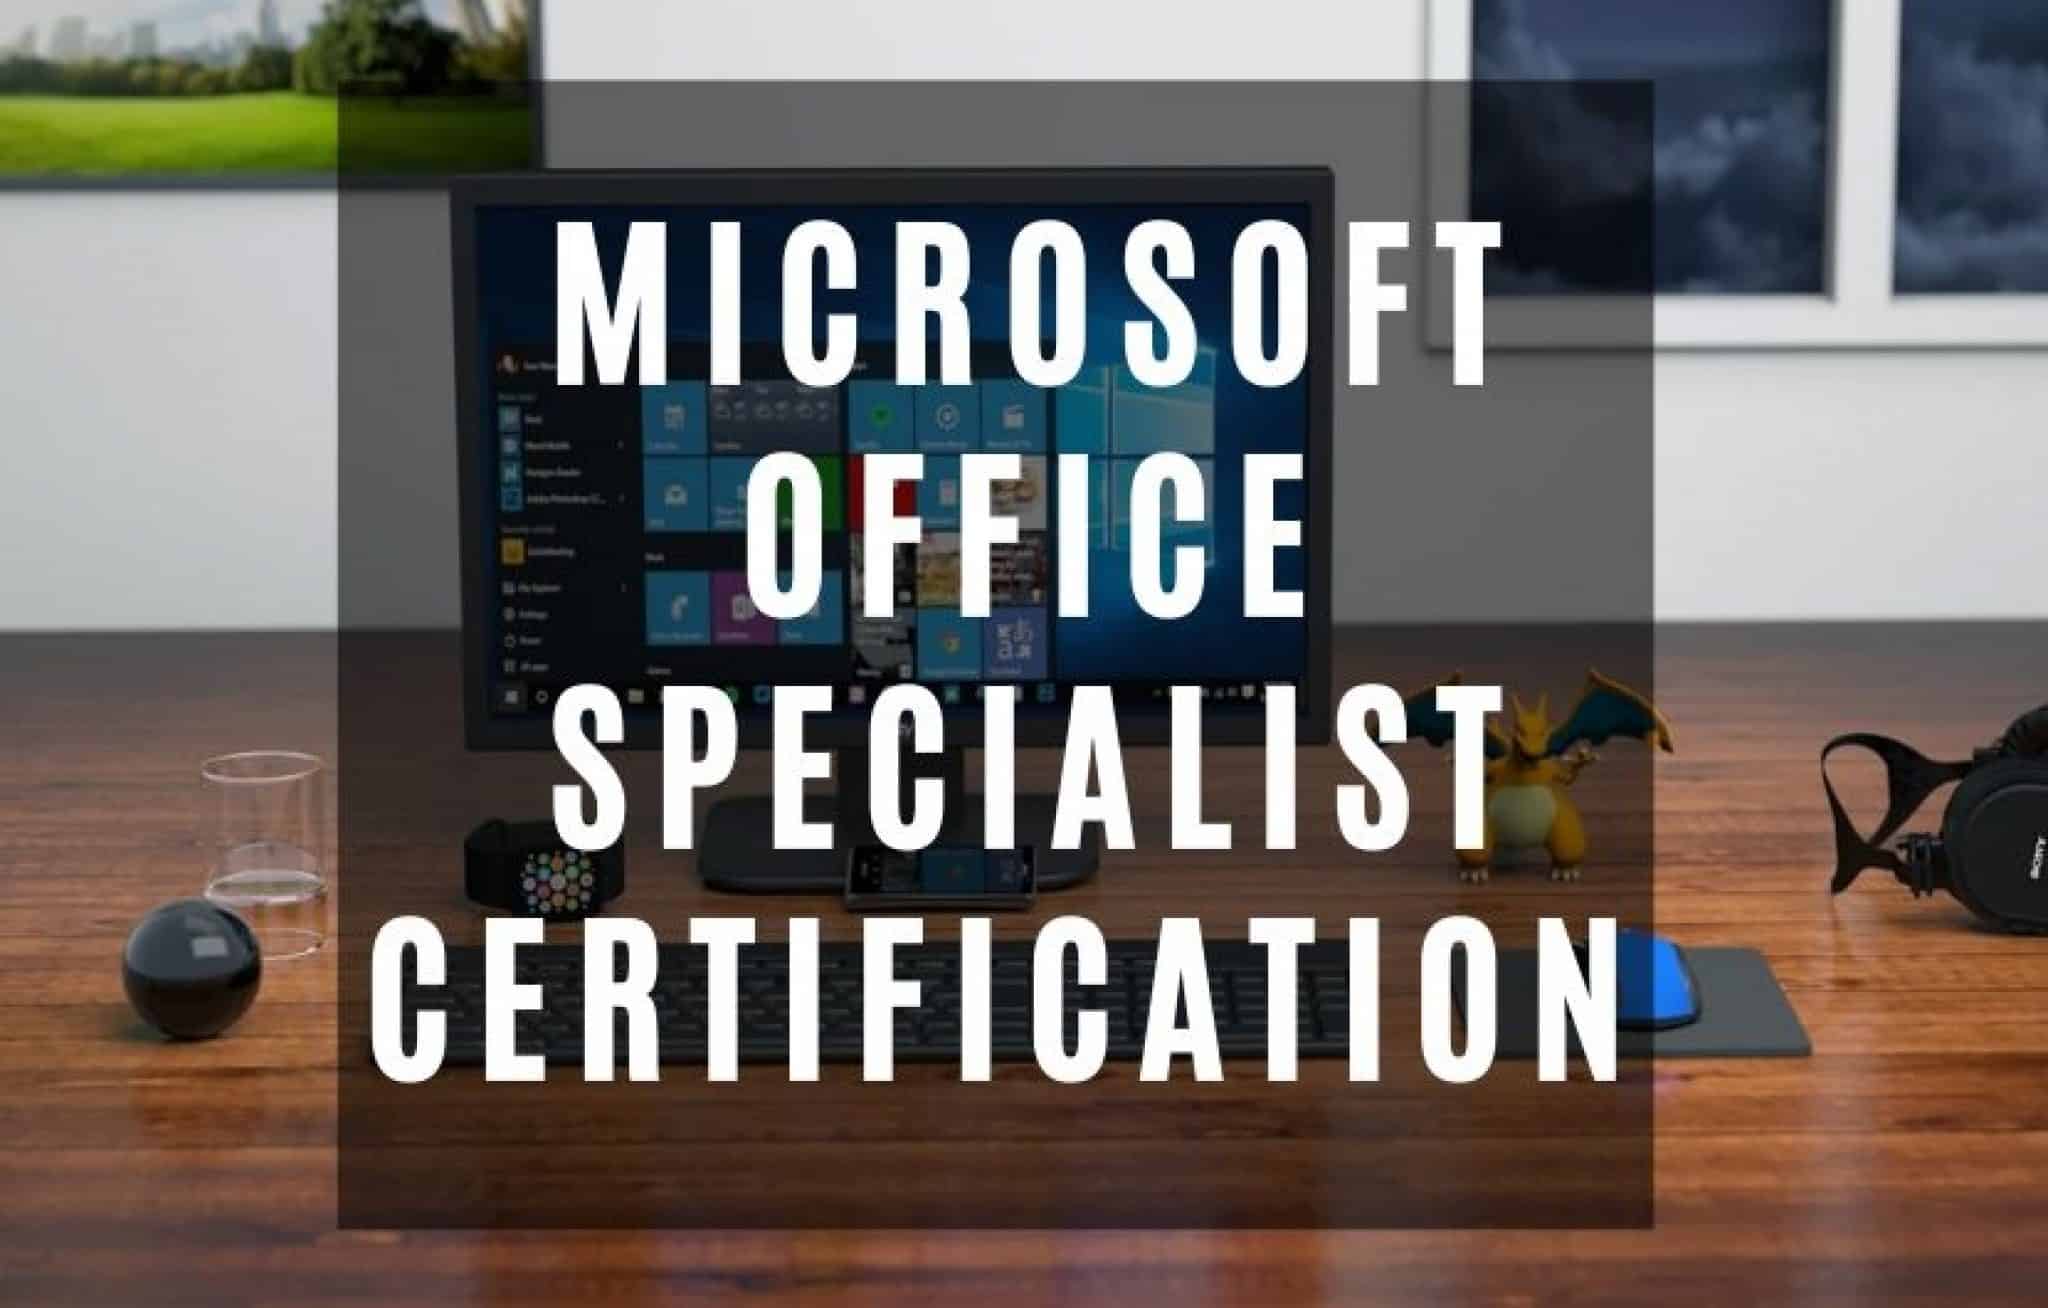 mos certification 2019